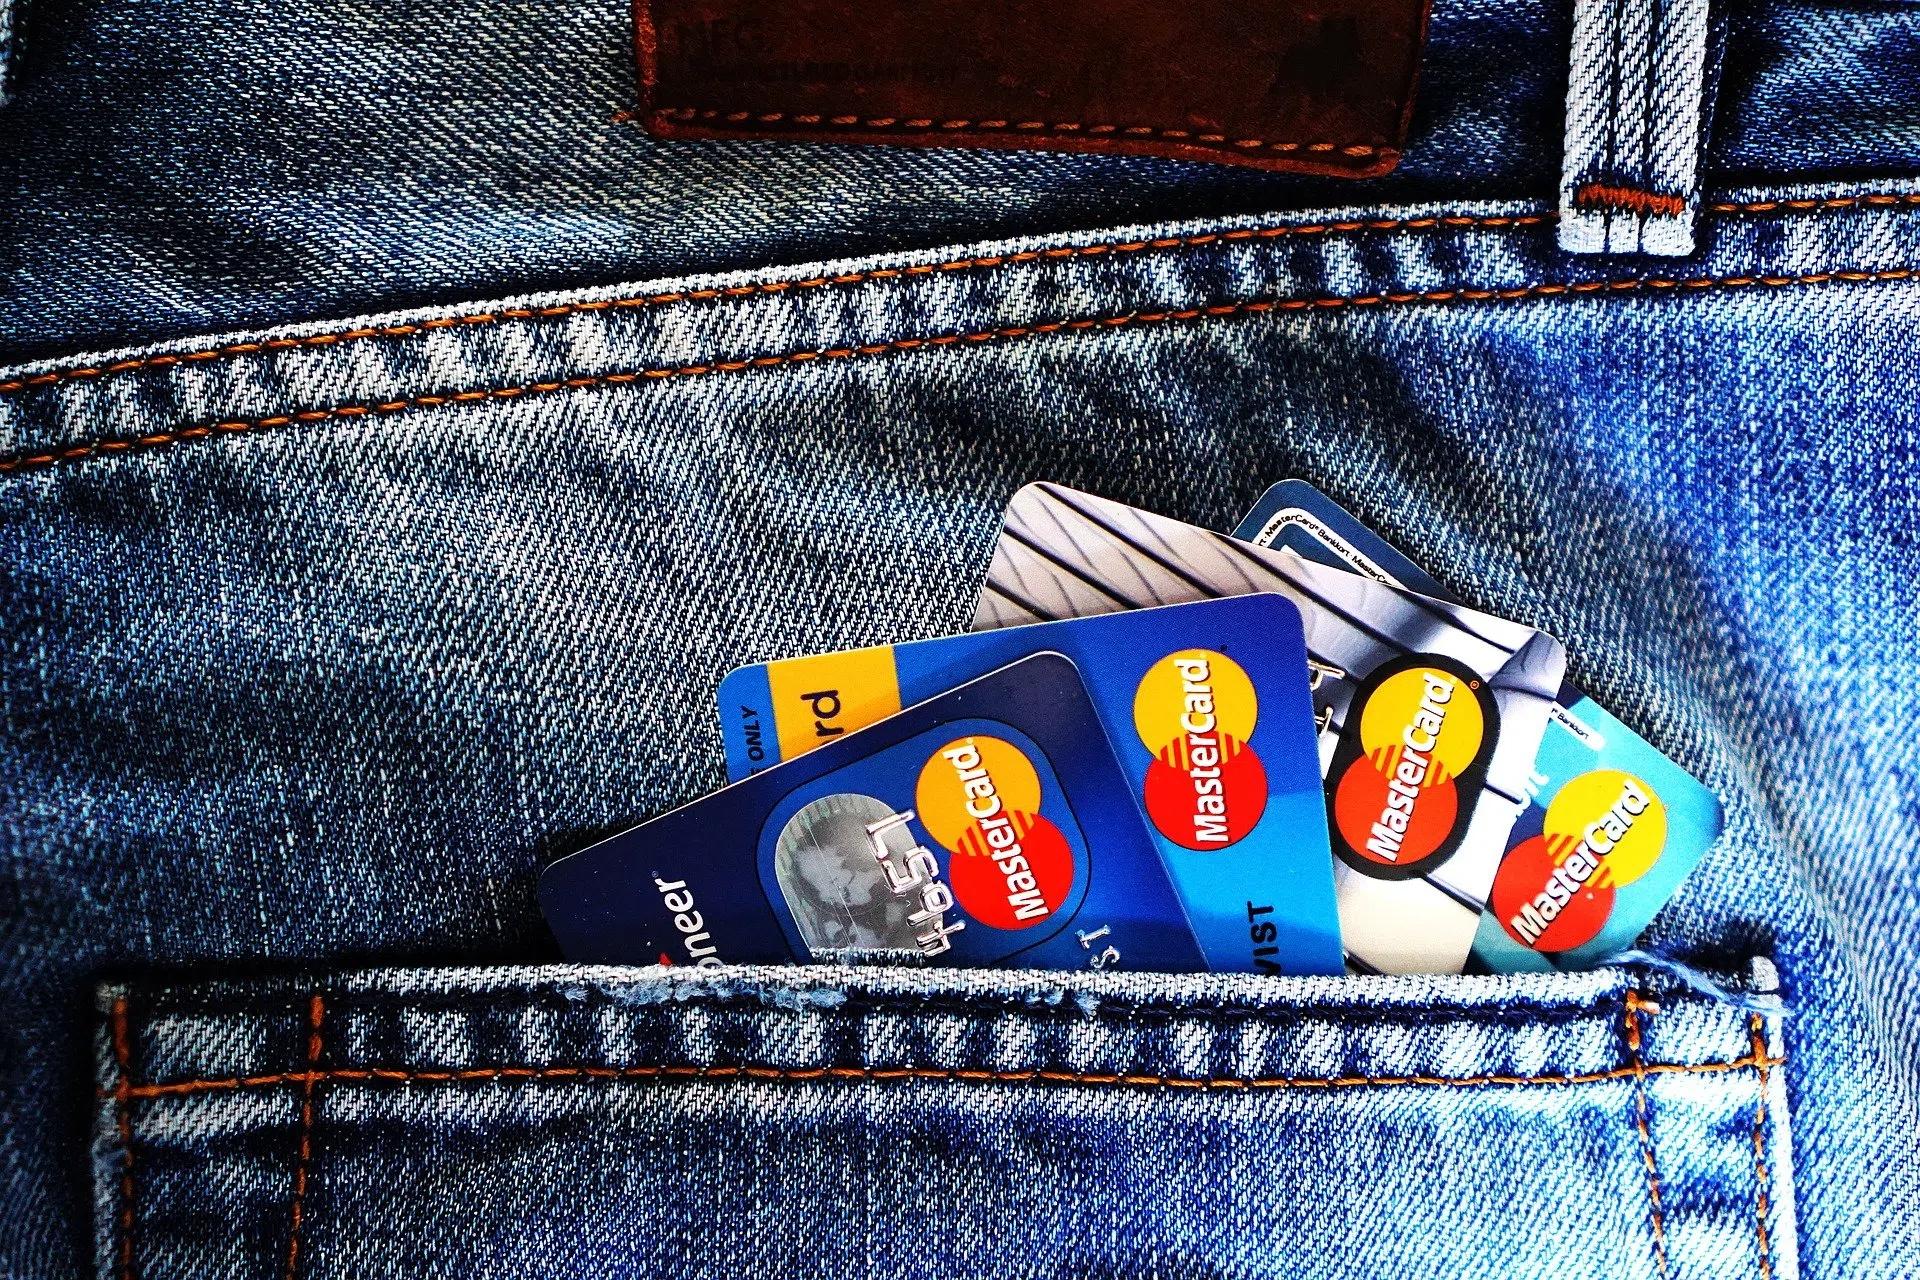 SURVEY: 1 in 3 Americans Maxing Out Credit Cards Because of Inflation